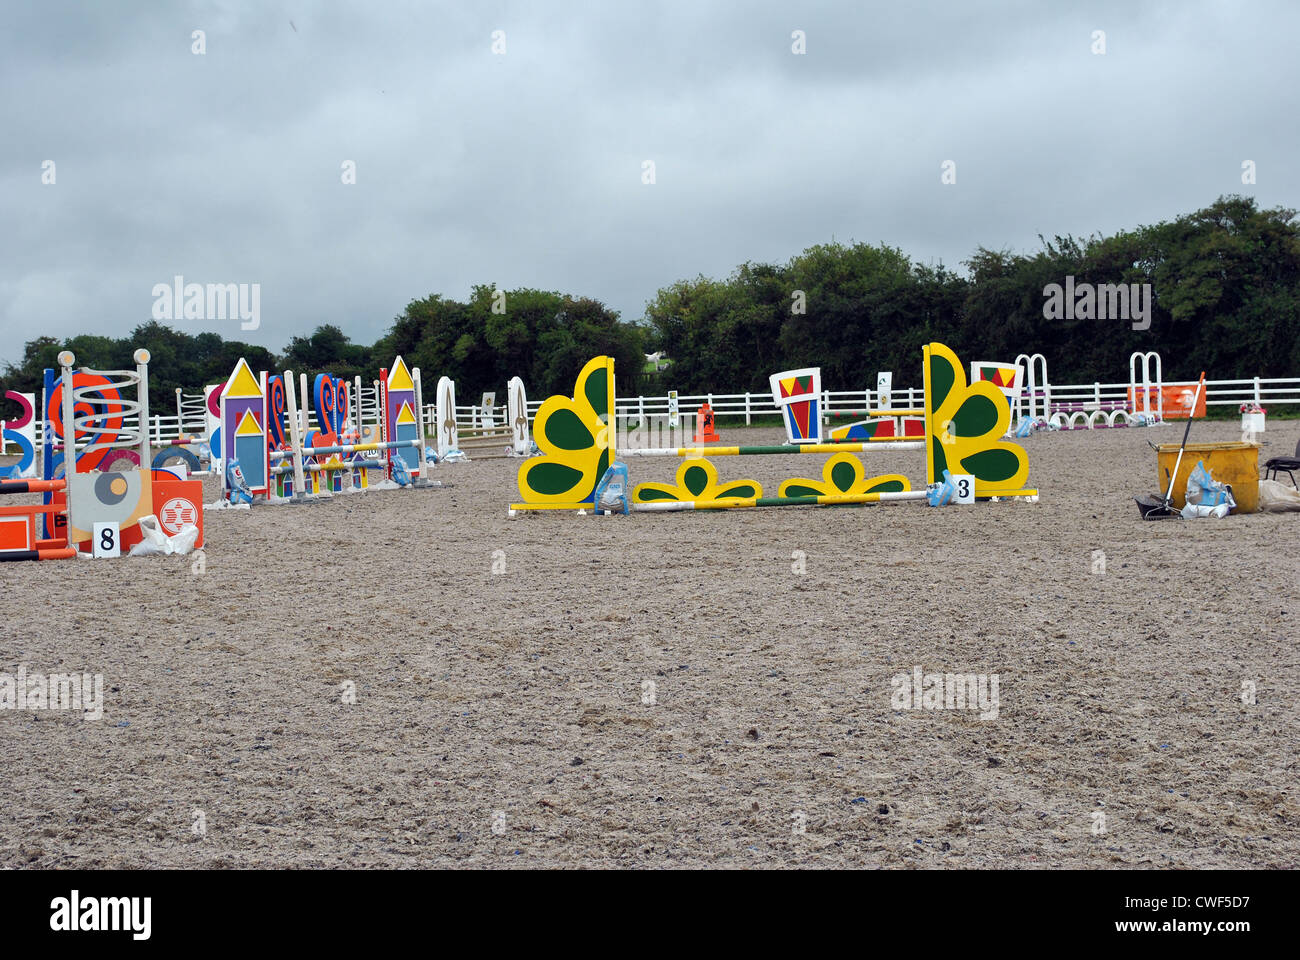 outdoor show jumping arena menage Stock Photo